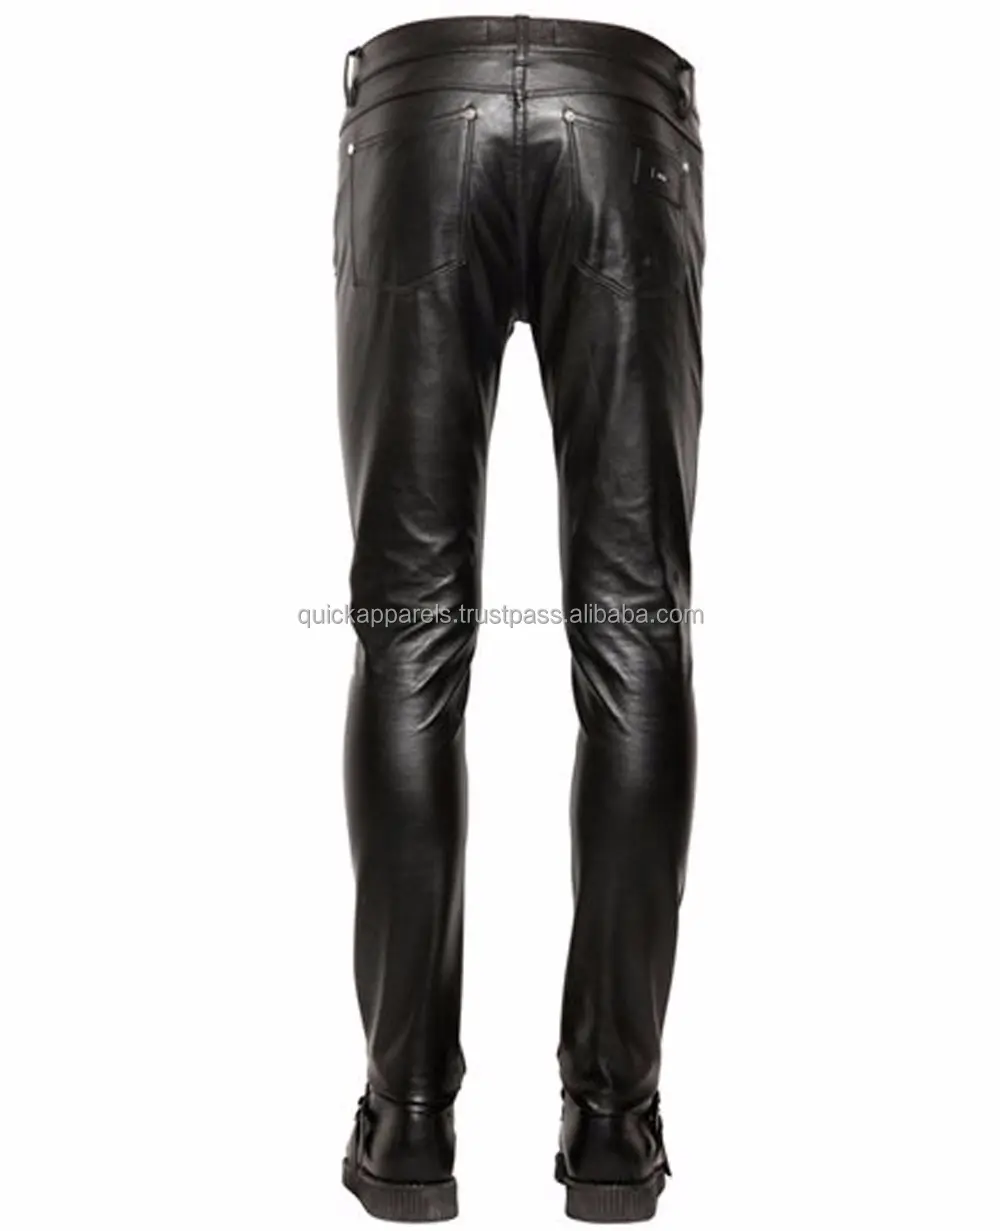 lightweight leather look trim skinny joggers men clothing pants style/newest leather slim fit straight dress pants